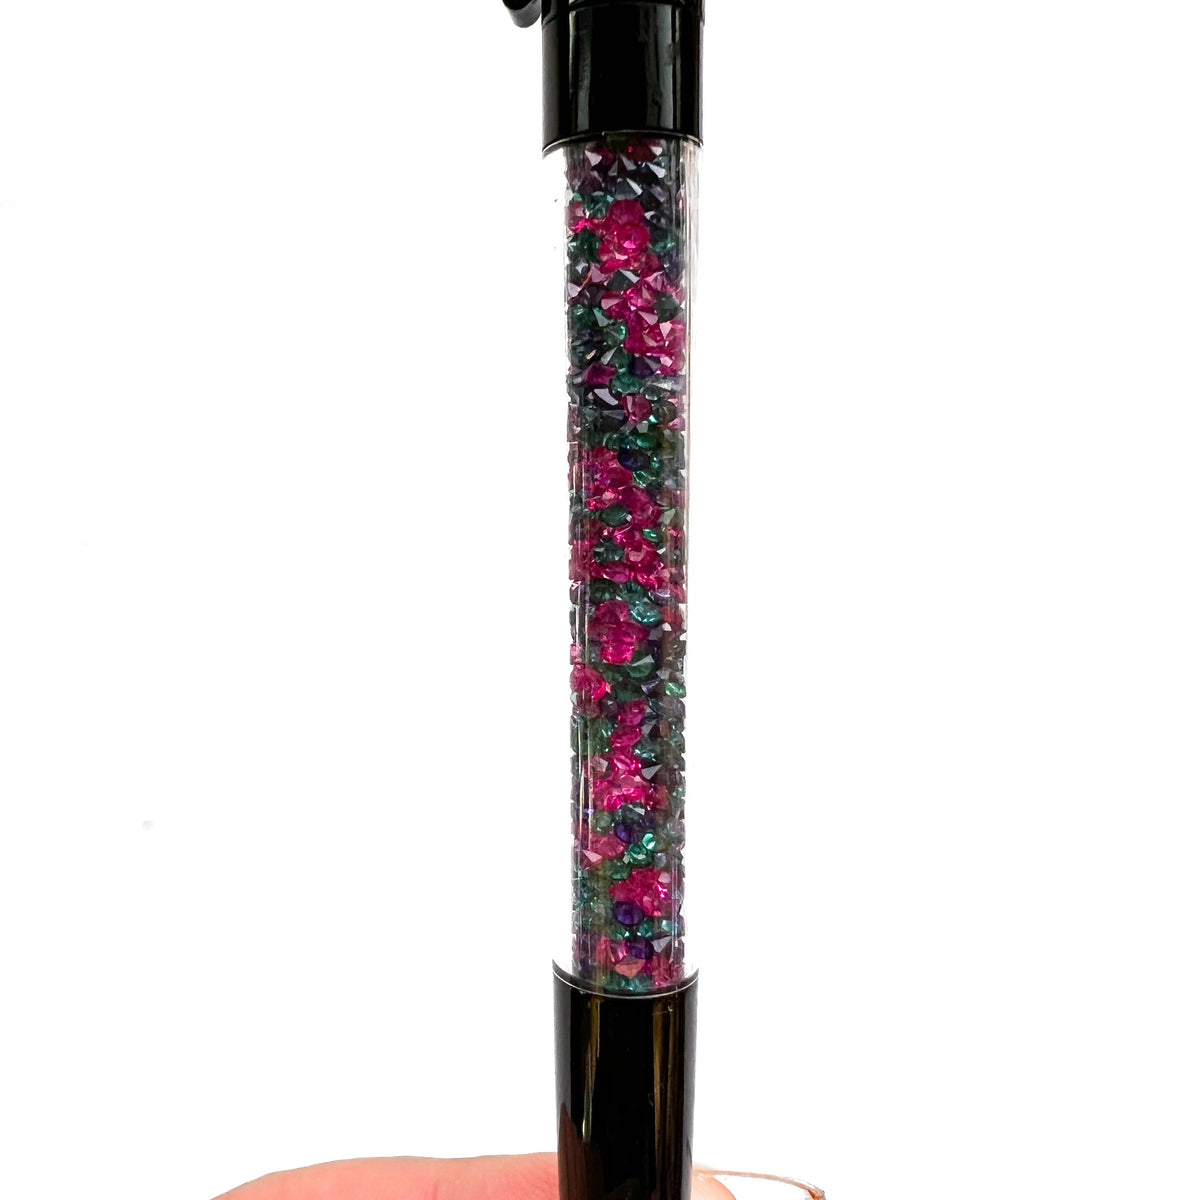 Dress Up Imperfect Crystal VBPen | limited pen